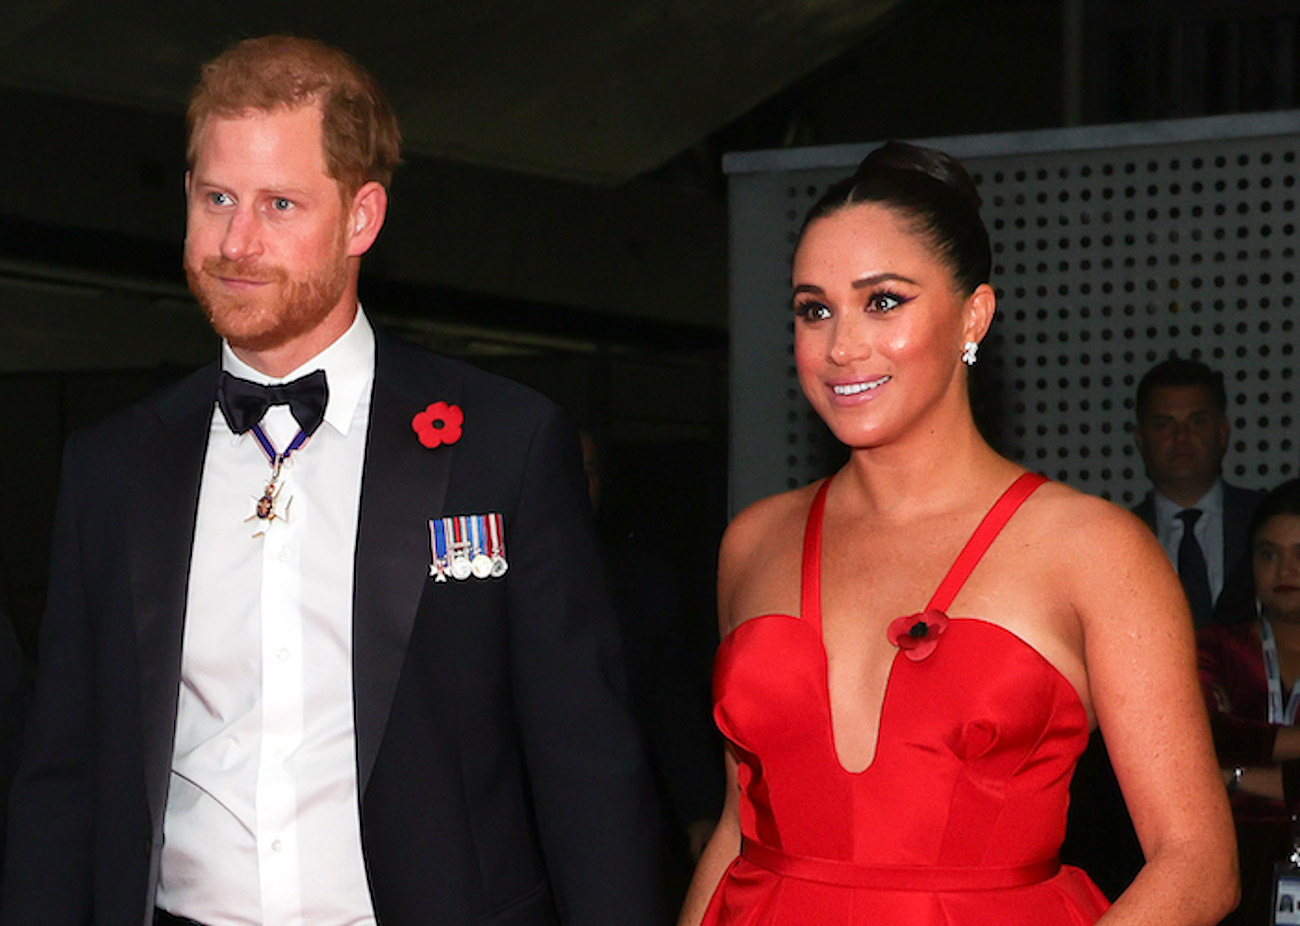 Prince Harry wears a tuxedo as he walks next to Meghan Markle in a red gown